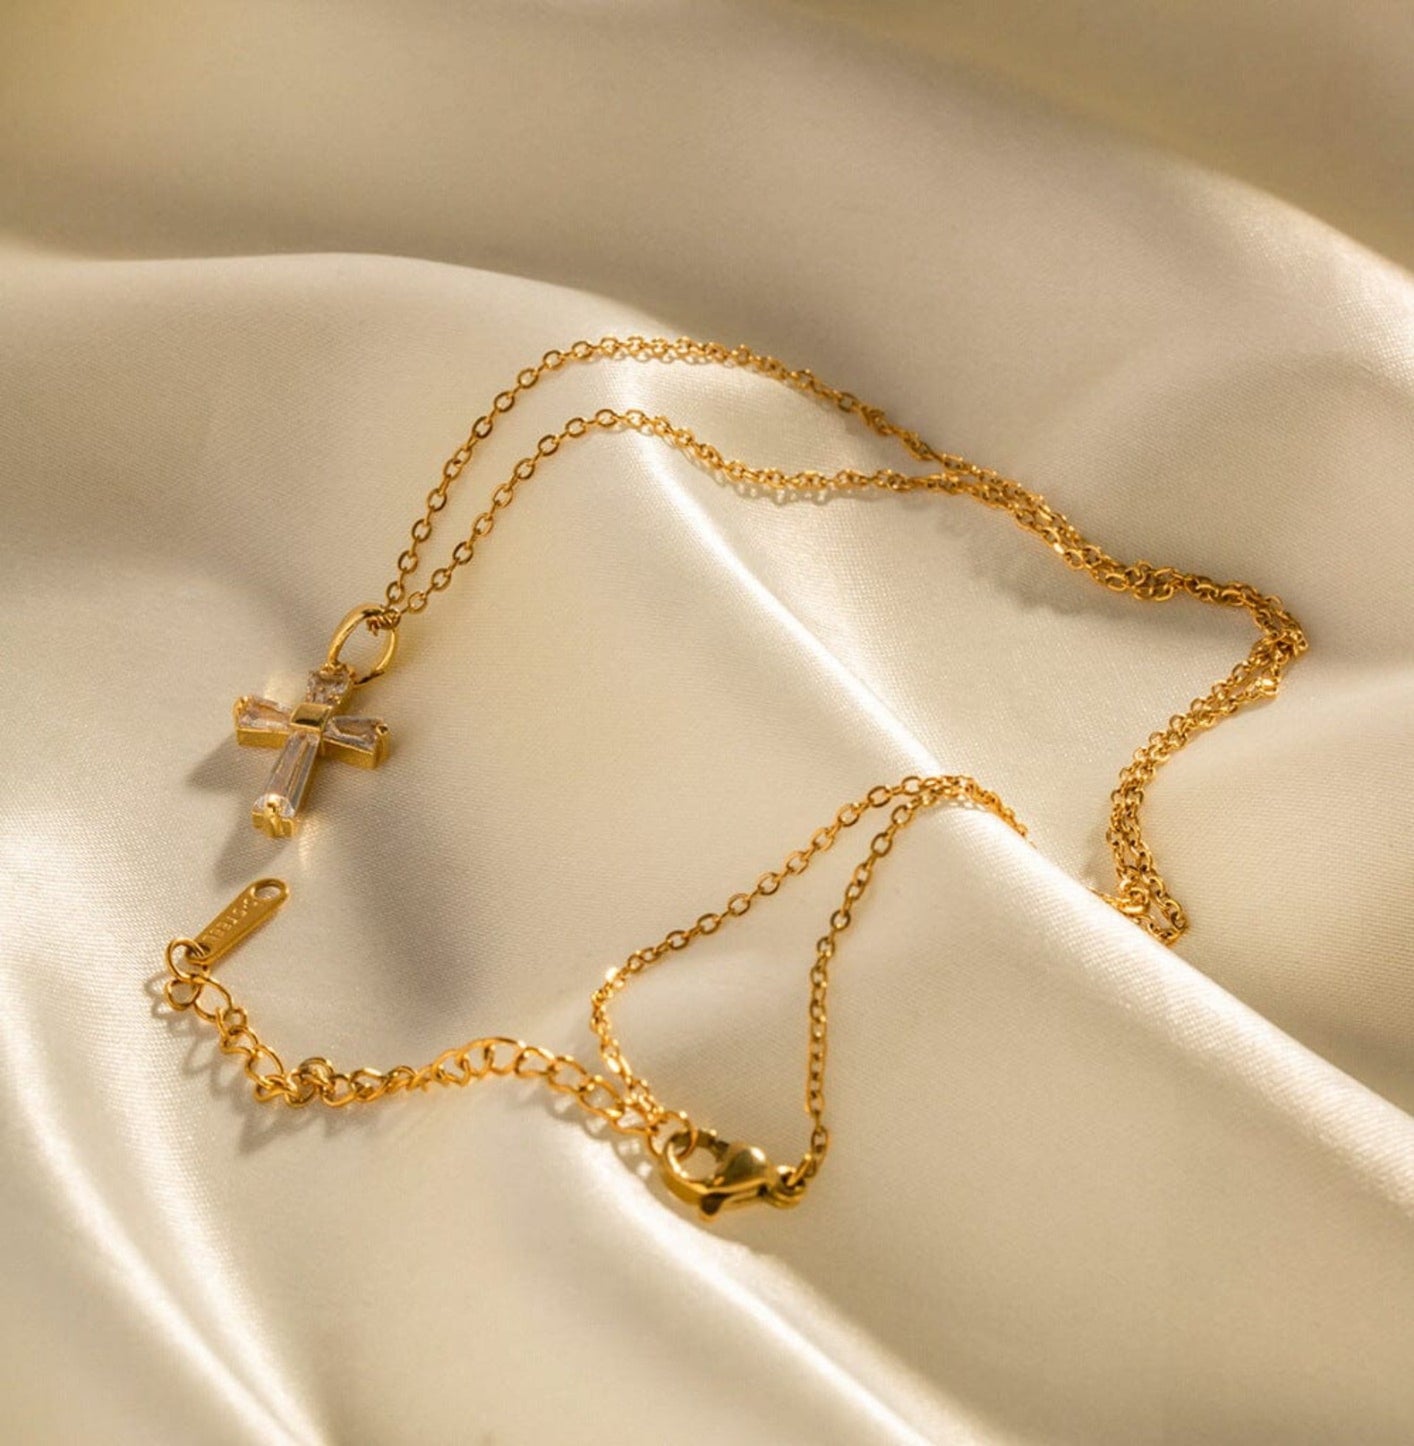 VERA NECKLACE neck Yubama Jewelry Online Store - The Elegant Designs of Gold and Silver ! 